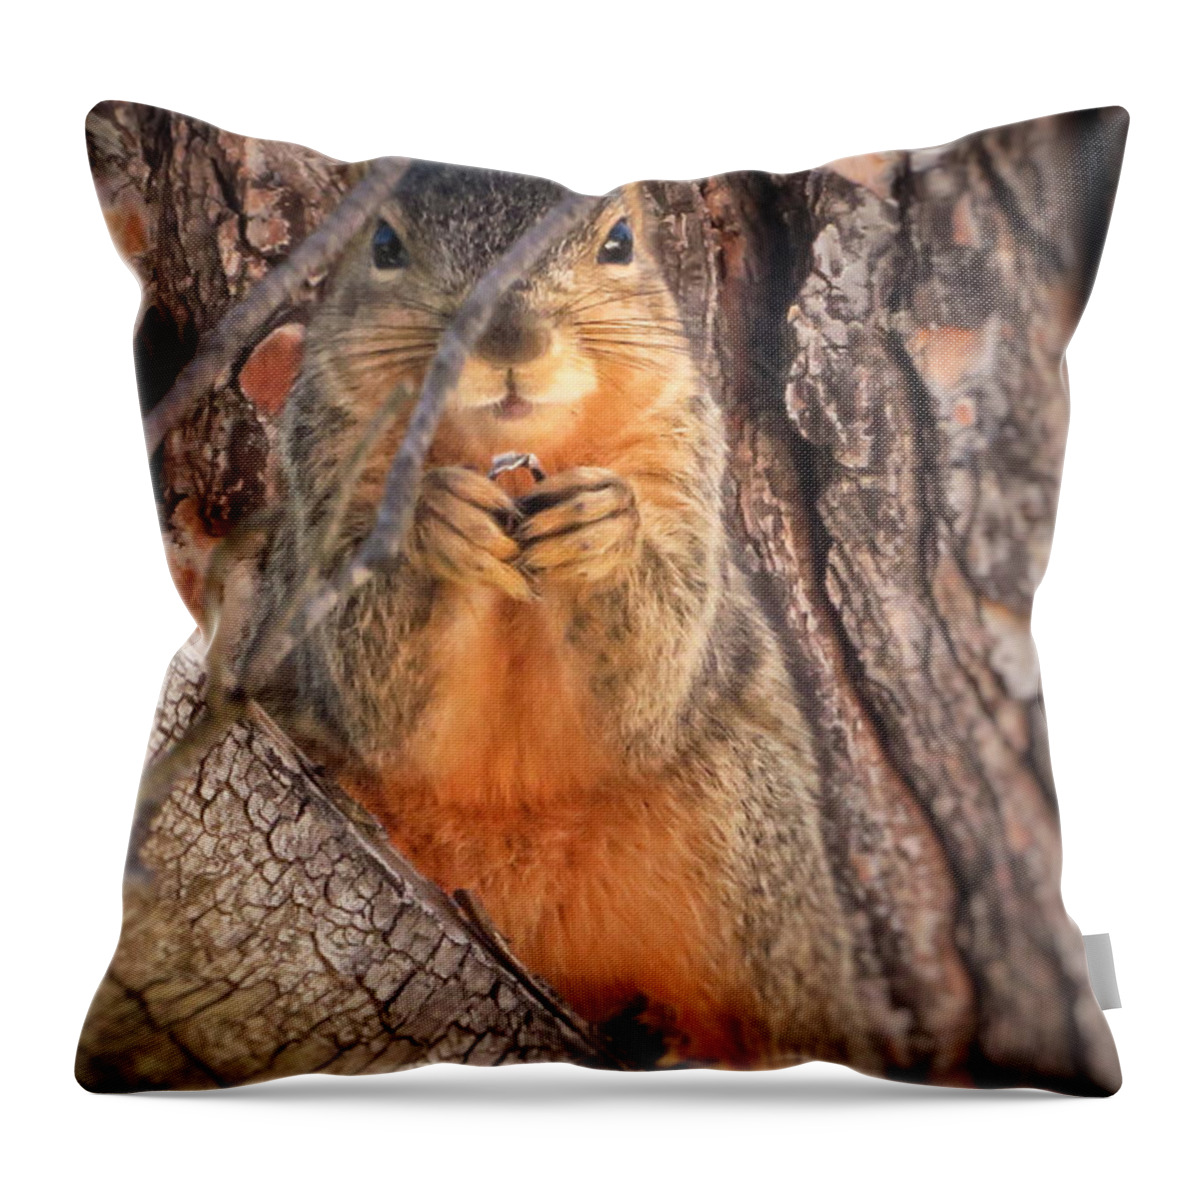 Squirrel Throw Pillow featuring the photograph Squirrel eating in tree by David Zumsteg